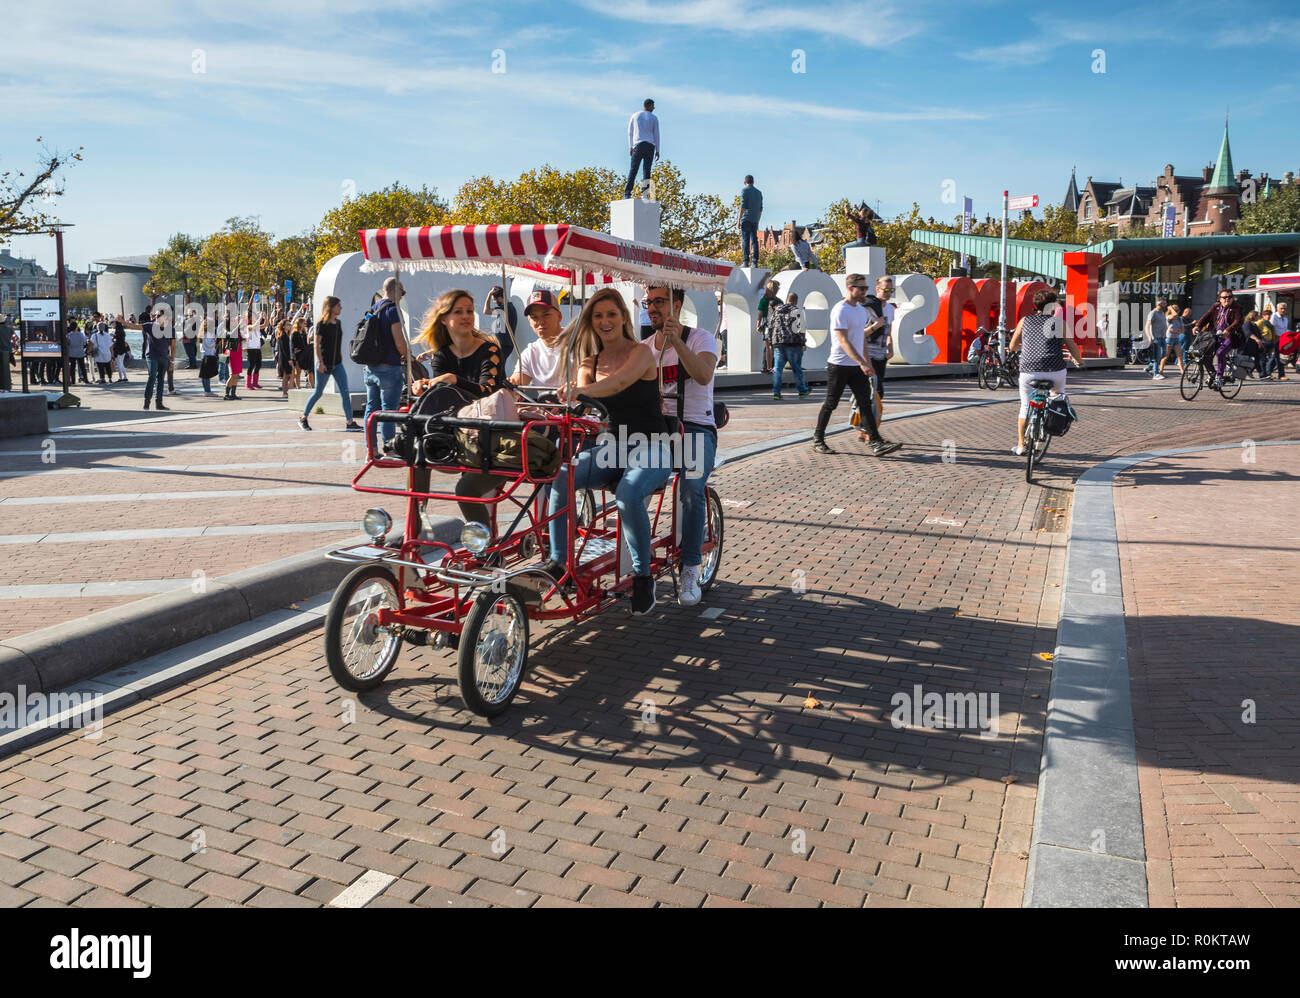 Tourists riding a bicycle carriage near Iamsterdam sign in Museumplein (Museum Square) Stock Photo